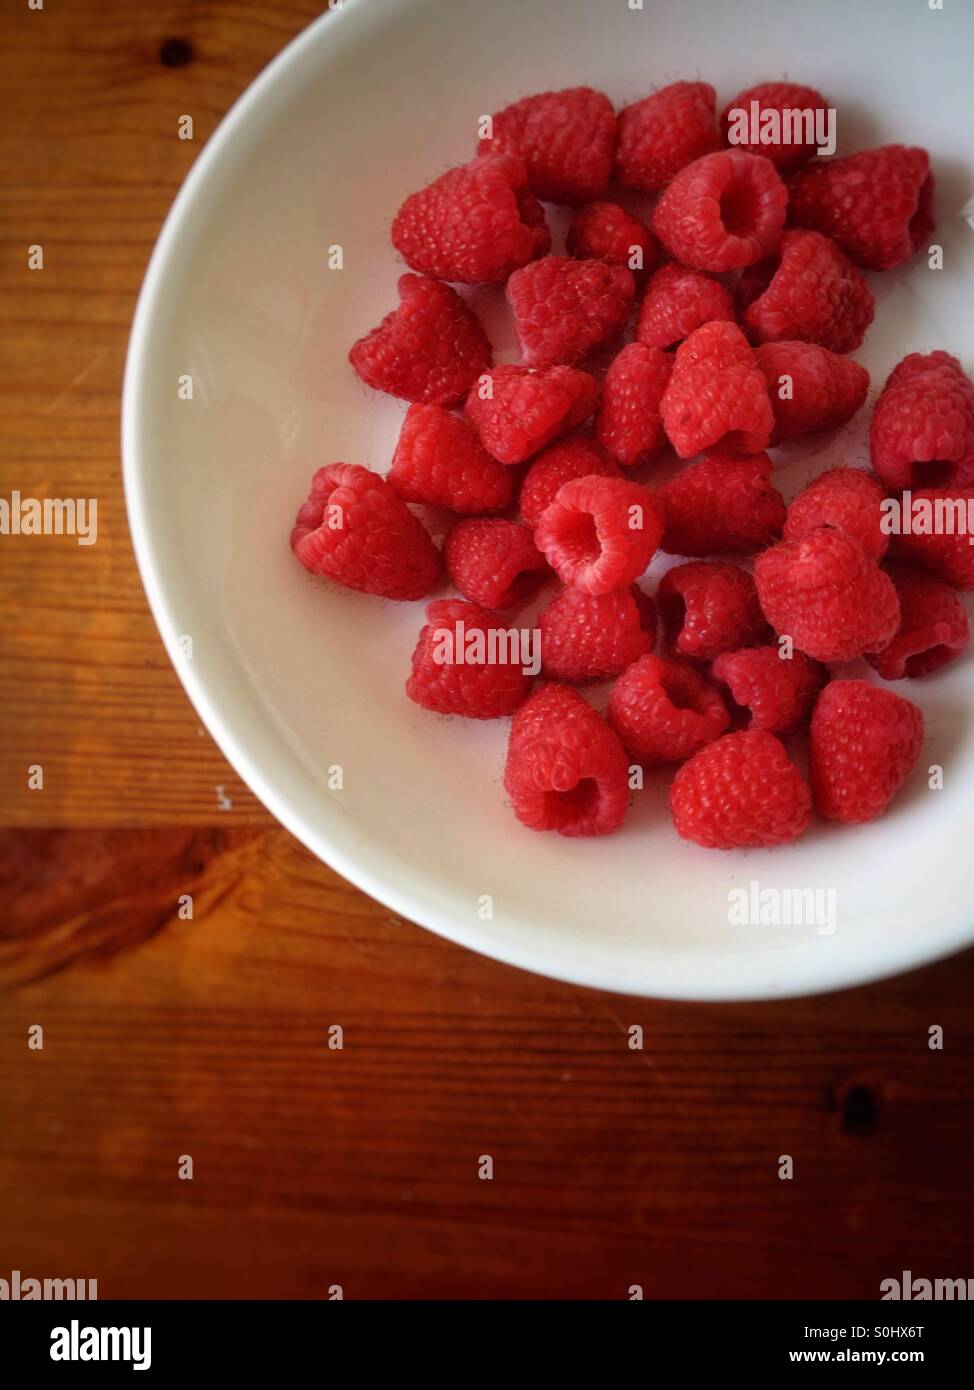 Aerial view of raspberry in a bowl Stock Photo